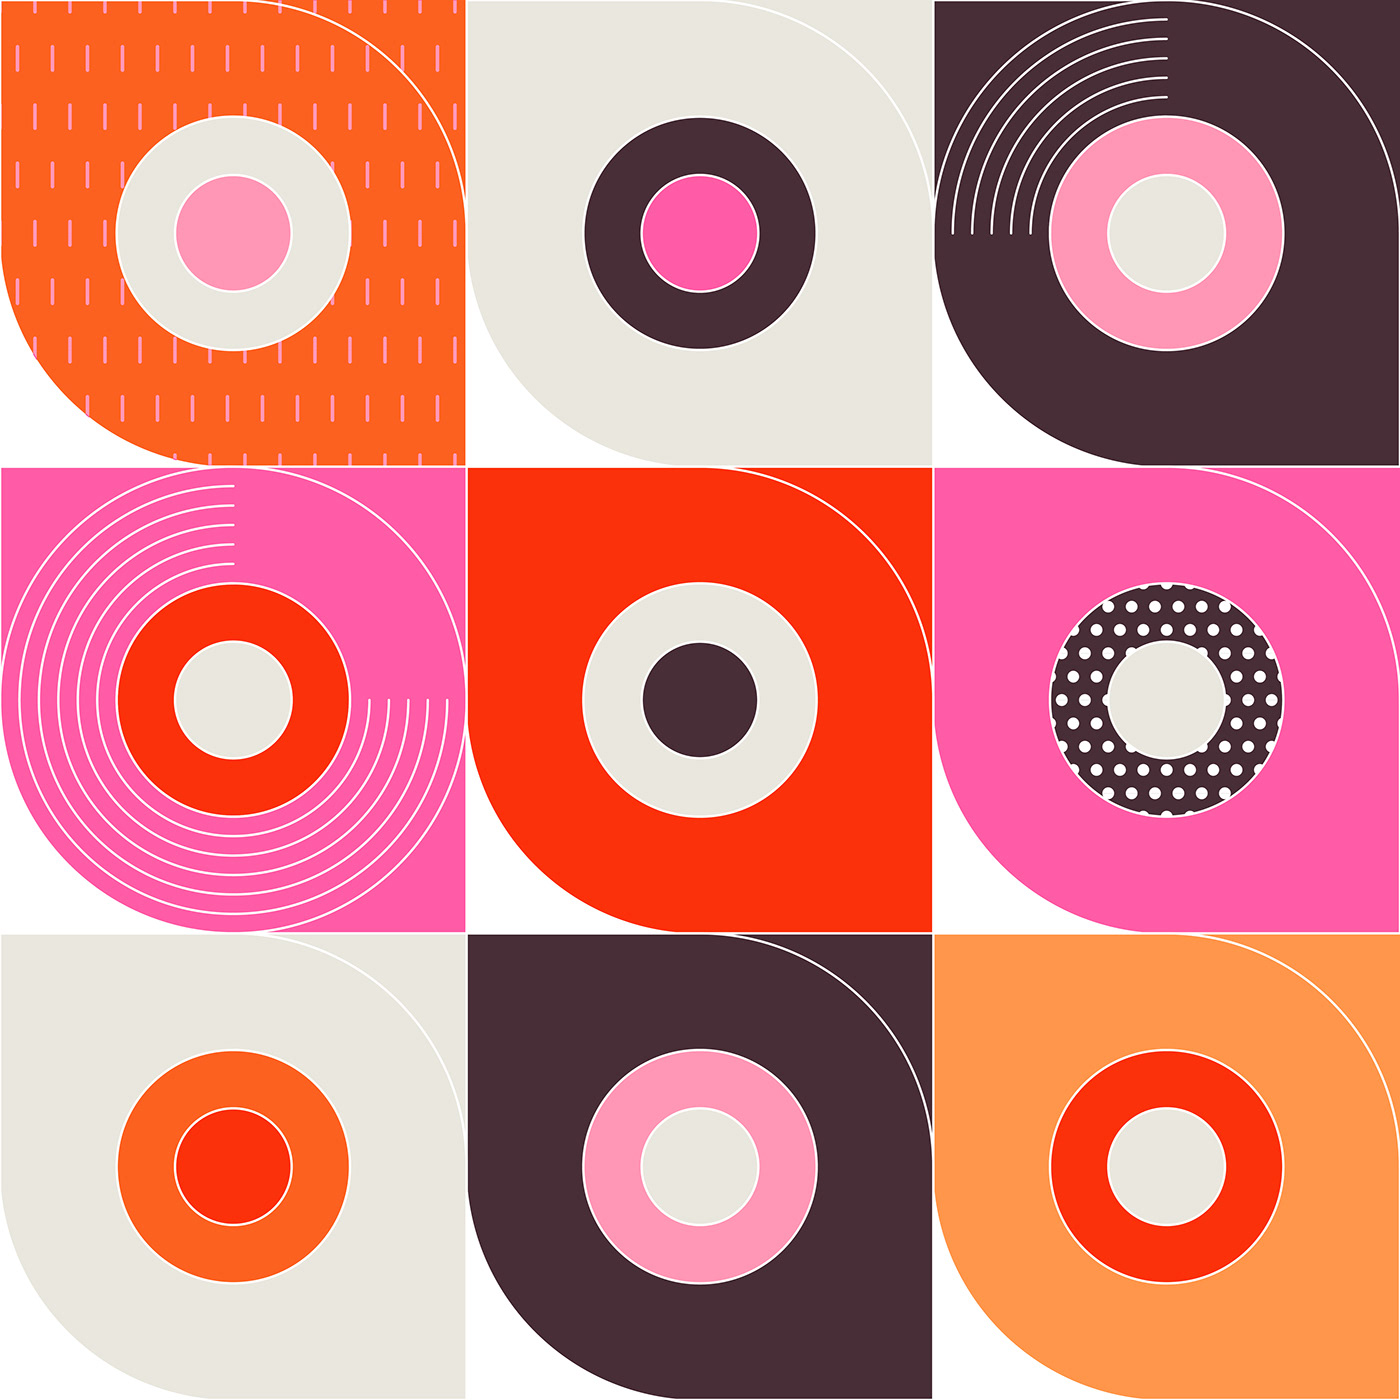 Geometric grid-based design inspired by Chu Bops - if you're not a 70s kid, google it...